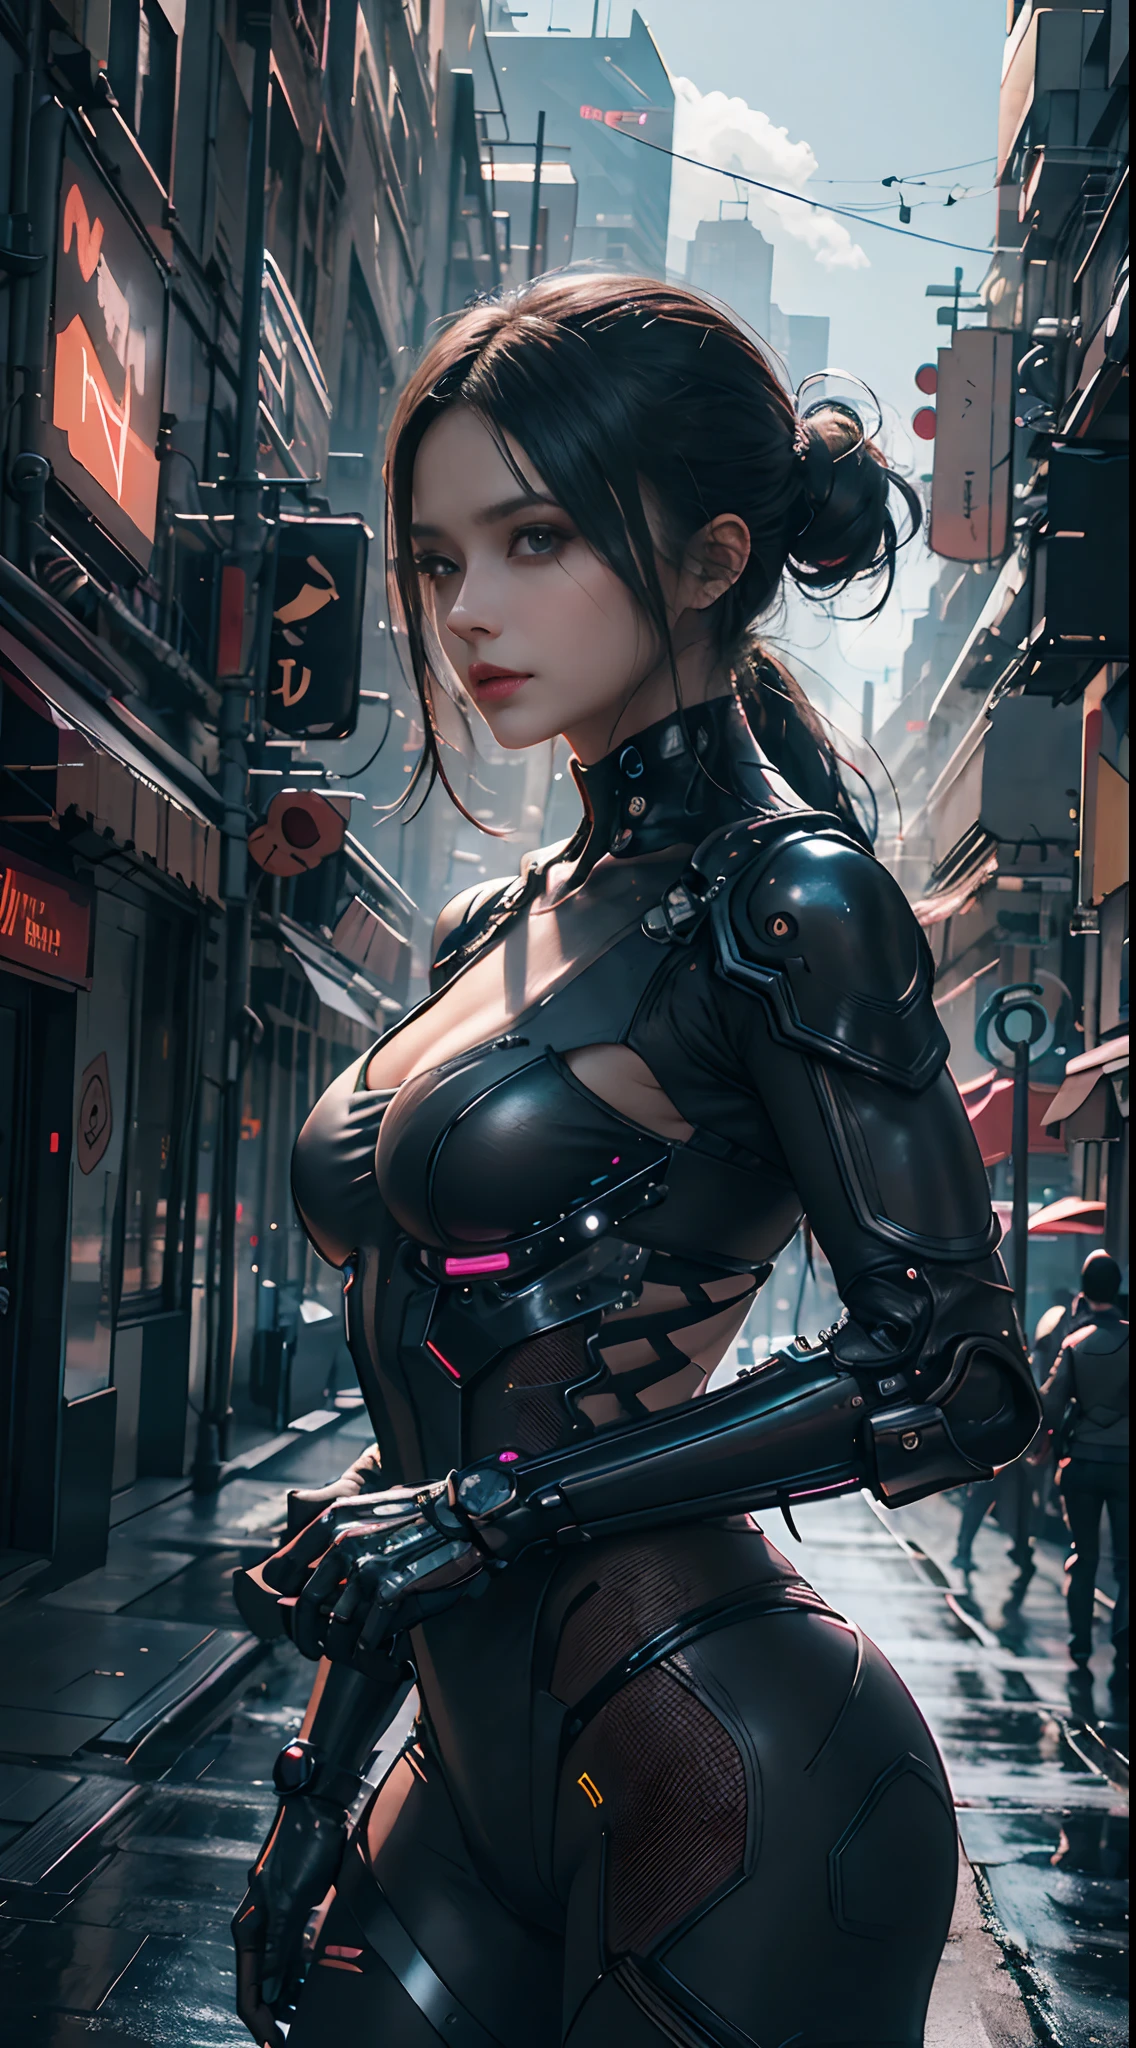 A girl，Dress up sexy，Future techwear，mechanical prosthesiechanical skeleton，  evening， A cyberpunk city in ruins， Neon Billboard， Better image quality， Maximum clarity and clarity， ultrarealistic realism， high detail， AFoFuturismo，Contrast of light and shadow， Cinmatic Lighting， ray tracing， Luz reFlectante， cowboy lens， F/4.0